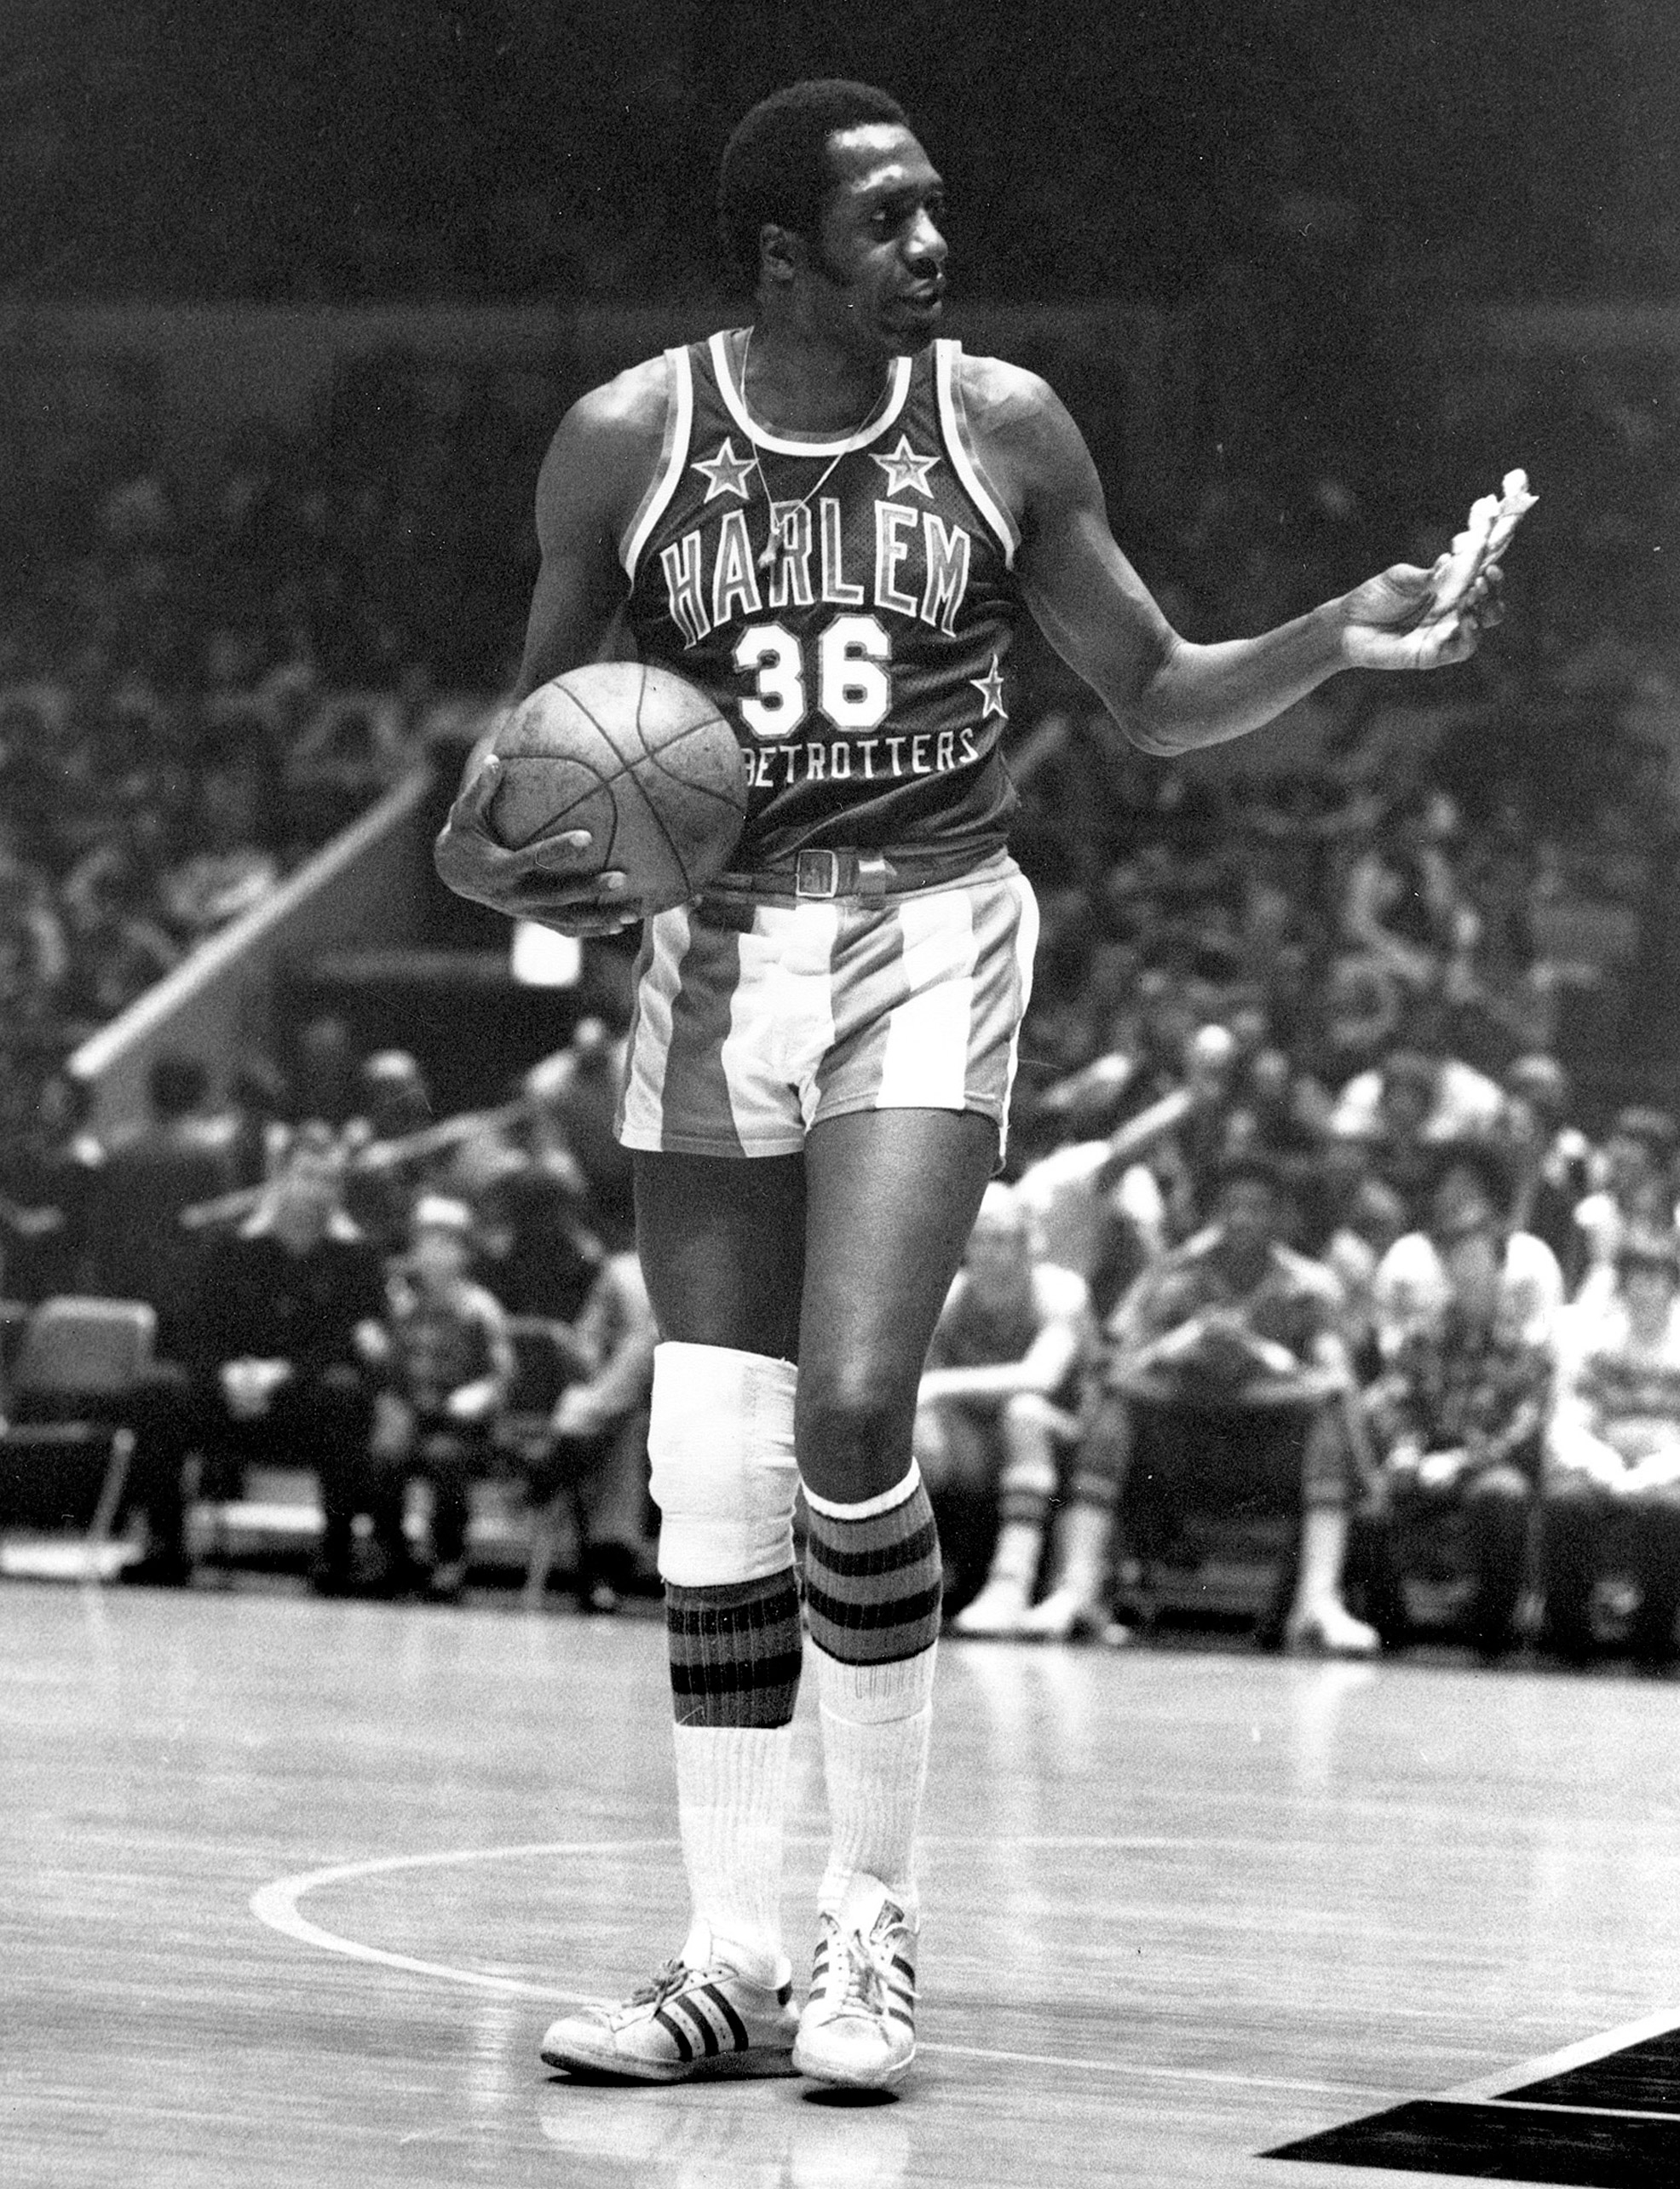 FILE - In this Feb. 18, 1978, file photo, Meadowlark Lemon, of the Harlem Globetrotters basketball team, offers a pretzel to a referee during a game at New York's Madison Square Garden. Lemon, known as the Globetrotters' "clown prince" of basketball, died Sunday, Dec. 27, 2015, in Scottsdale, Ariz. He was 83. (AP Photo/Suzanne Vlamis, File)